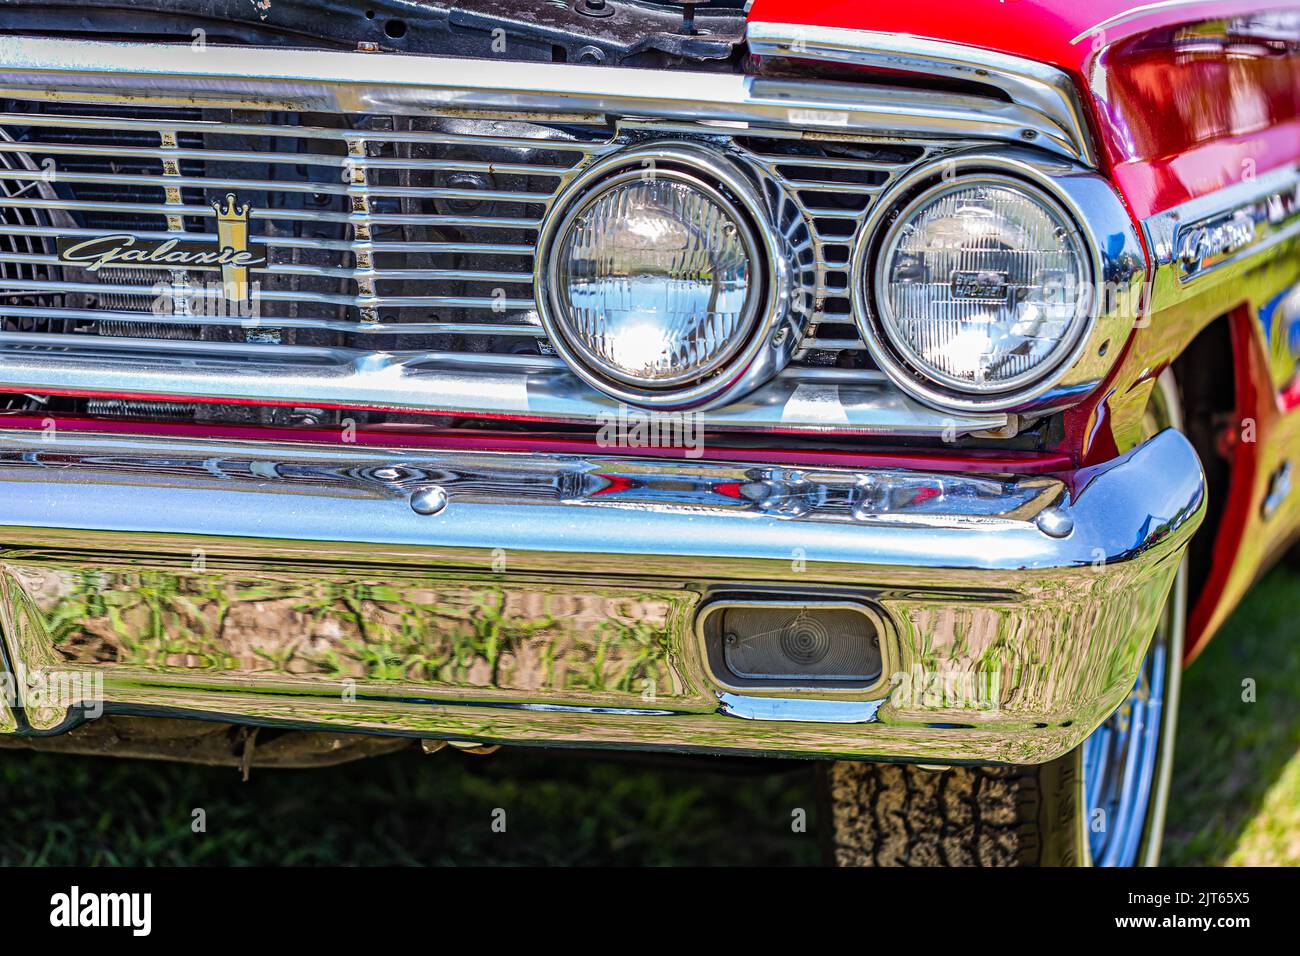 Statesboro, GA - May 17, 2014: Shallow depth of field closeup of the front end details on a 1964 Ford Galaxie 500 XL convertible. Stock Photo